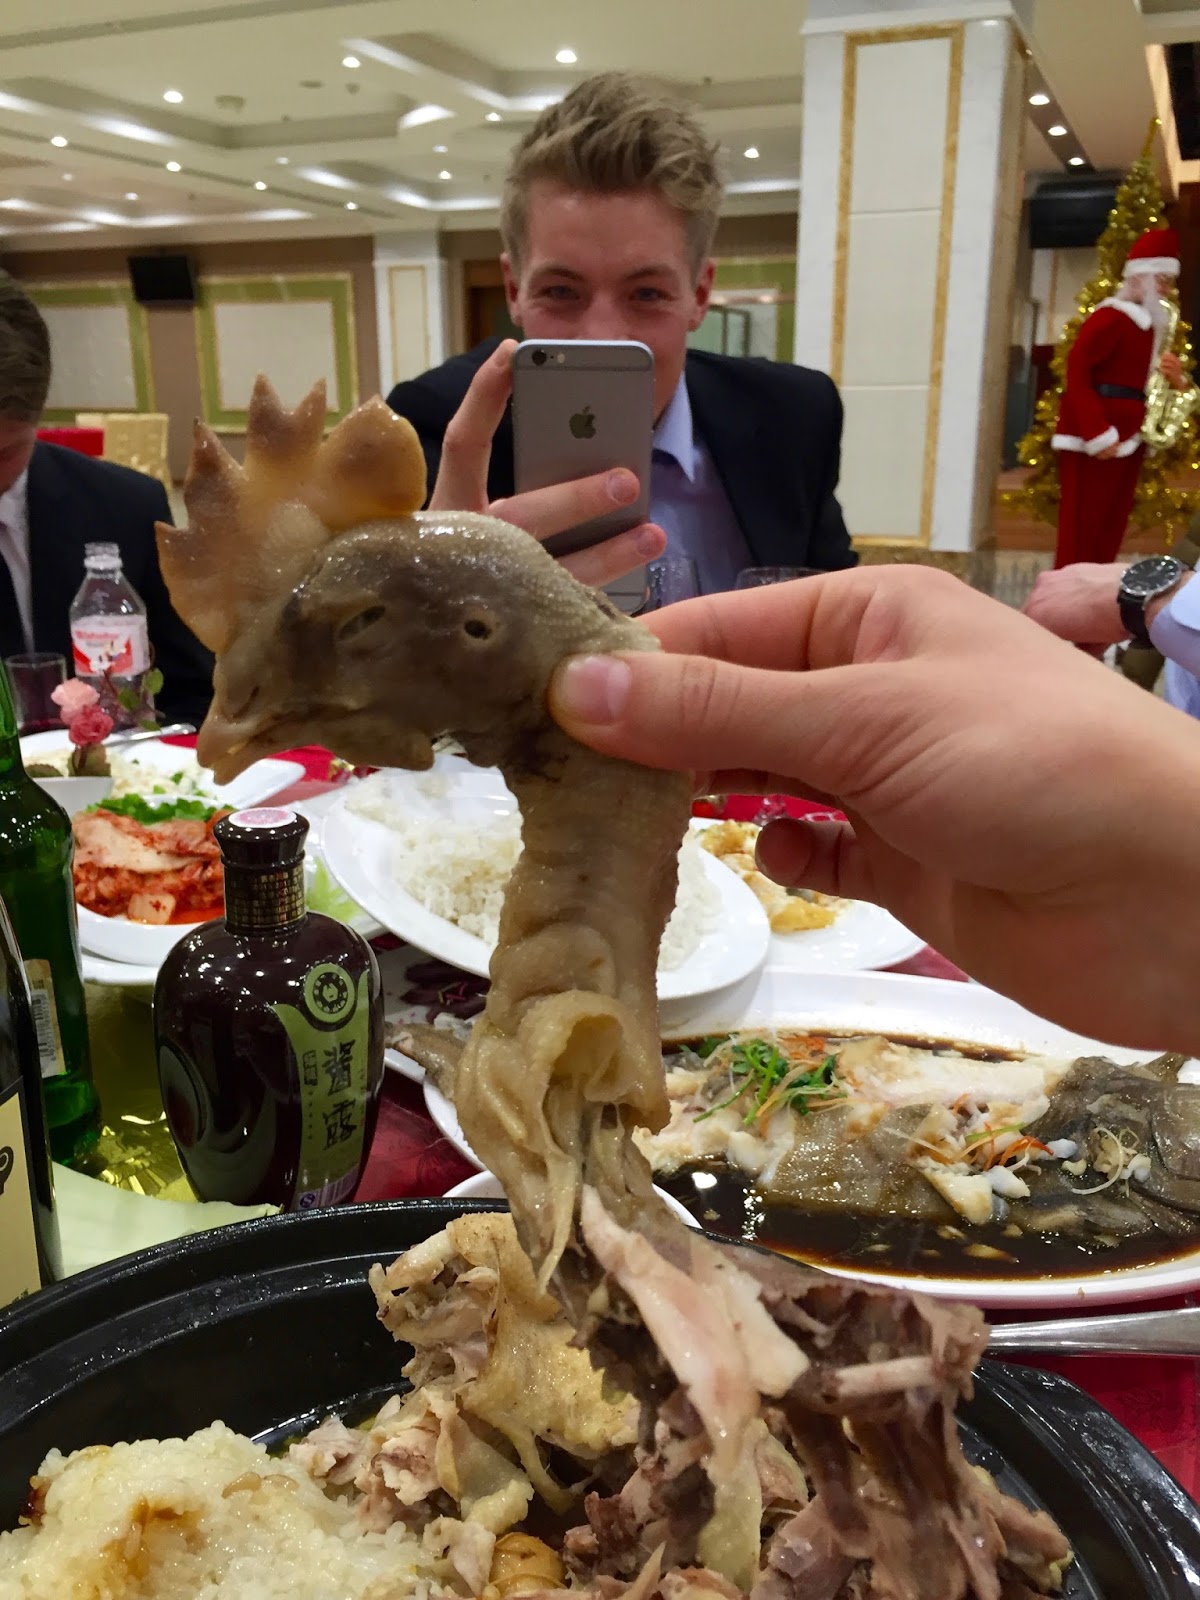 A chicken head featured prominently on the menu during the 2016 China Tour de Ski. (Photo: courtesy Holly Brooks)